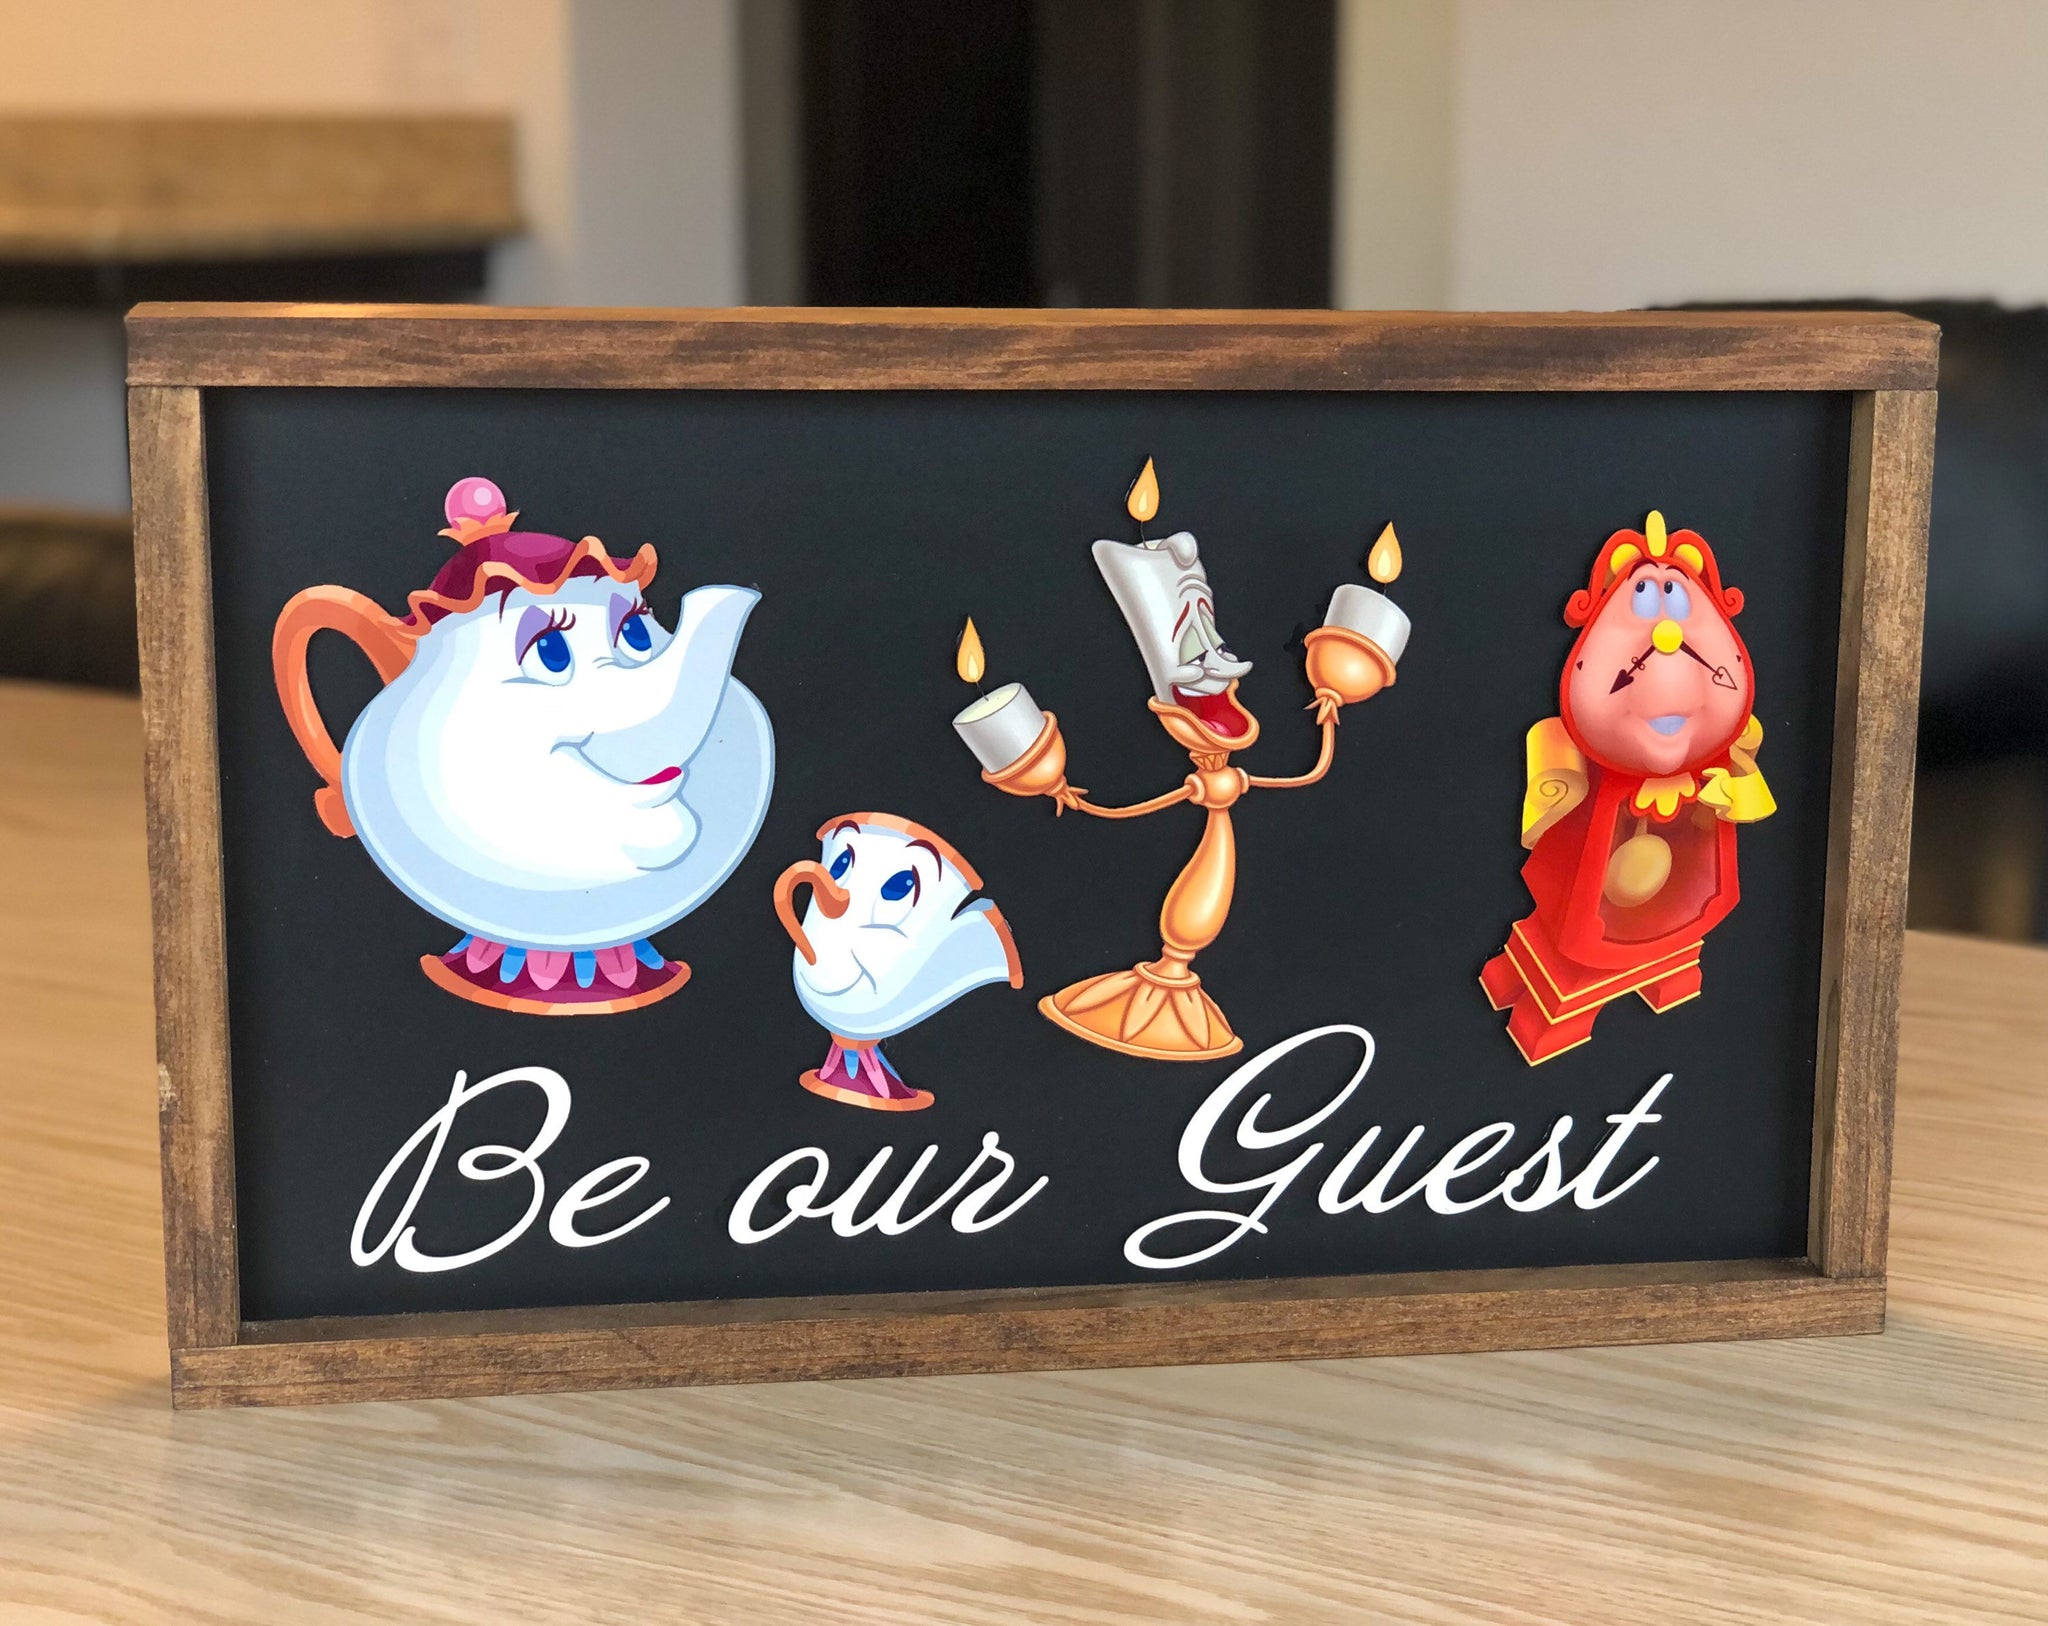 Be our Guest Disney inspired home sign, Disney Home Decor, wedding dec –  D2stobbDesigns